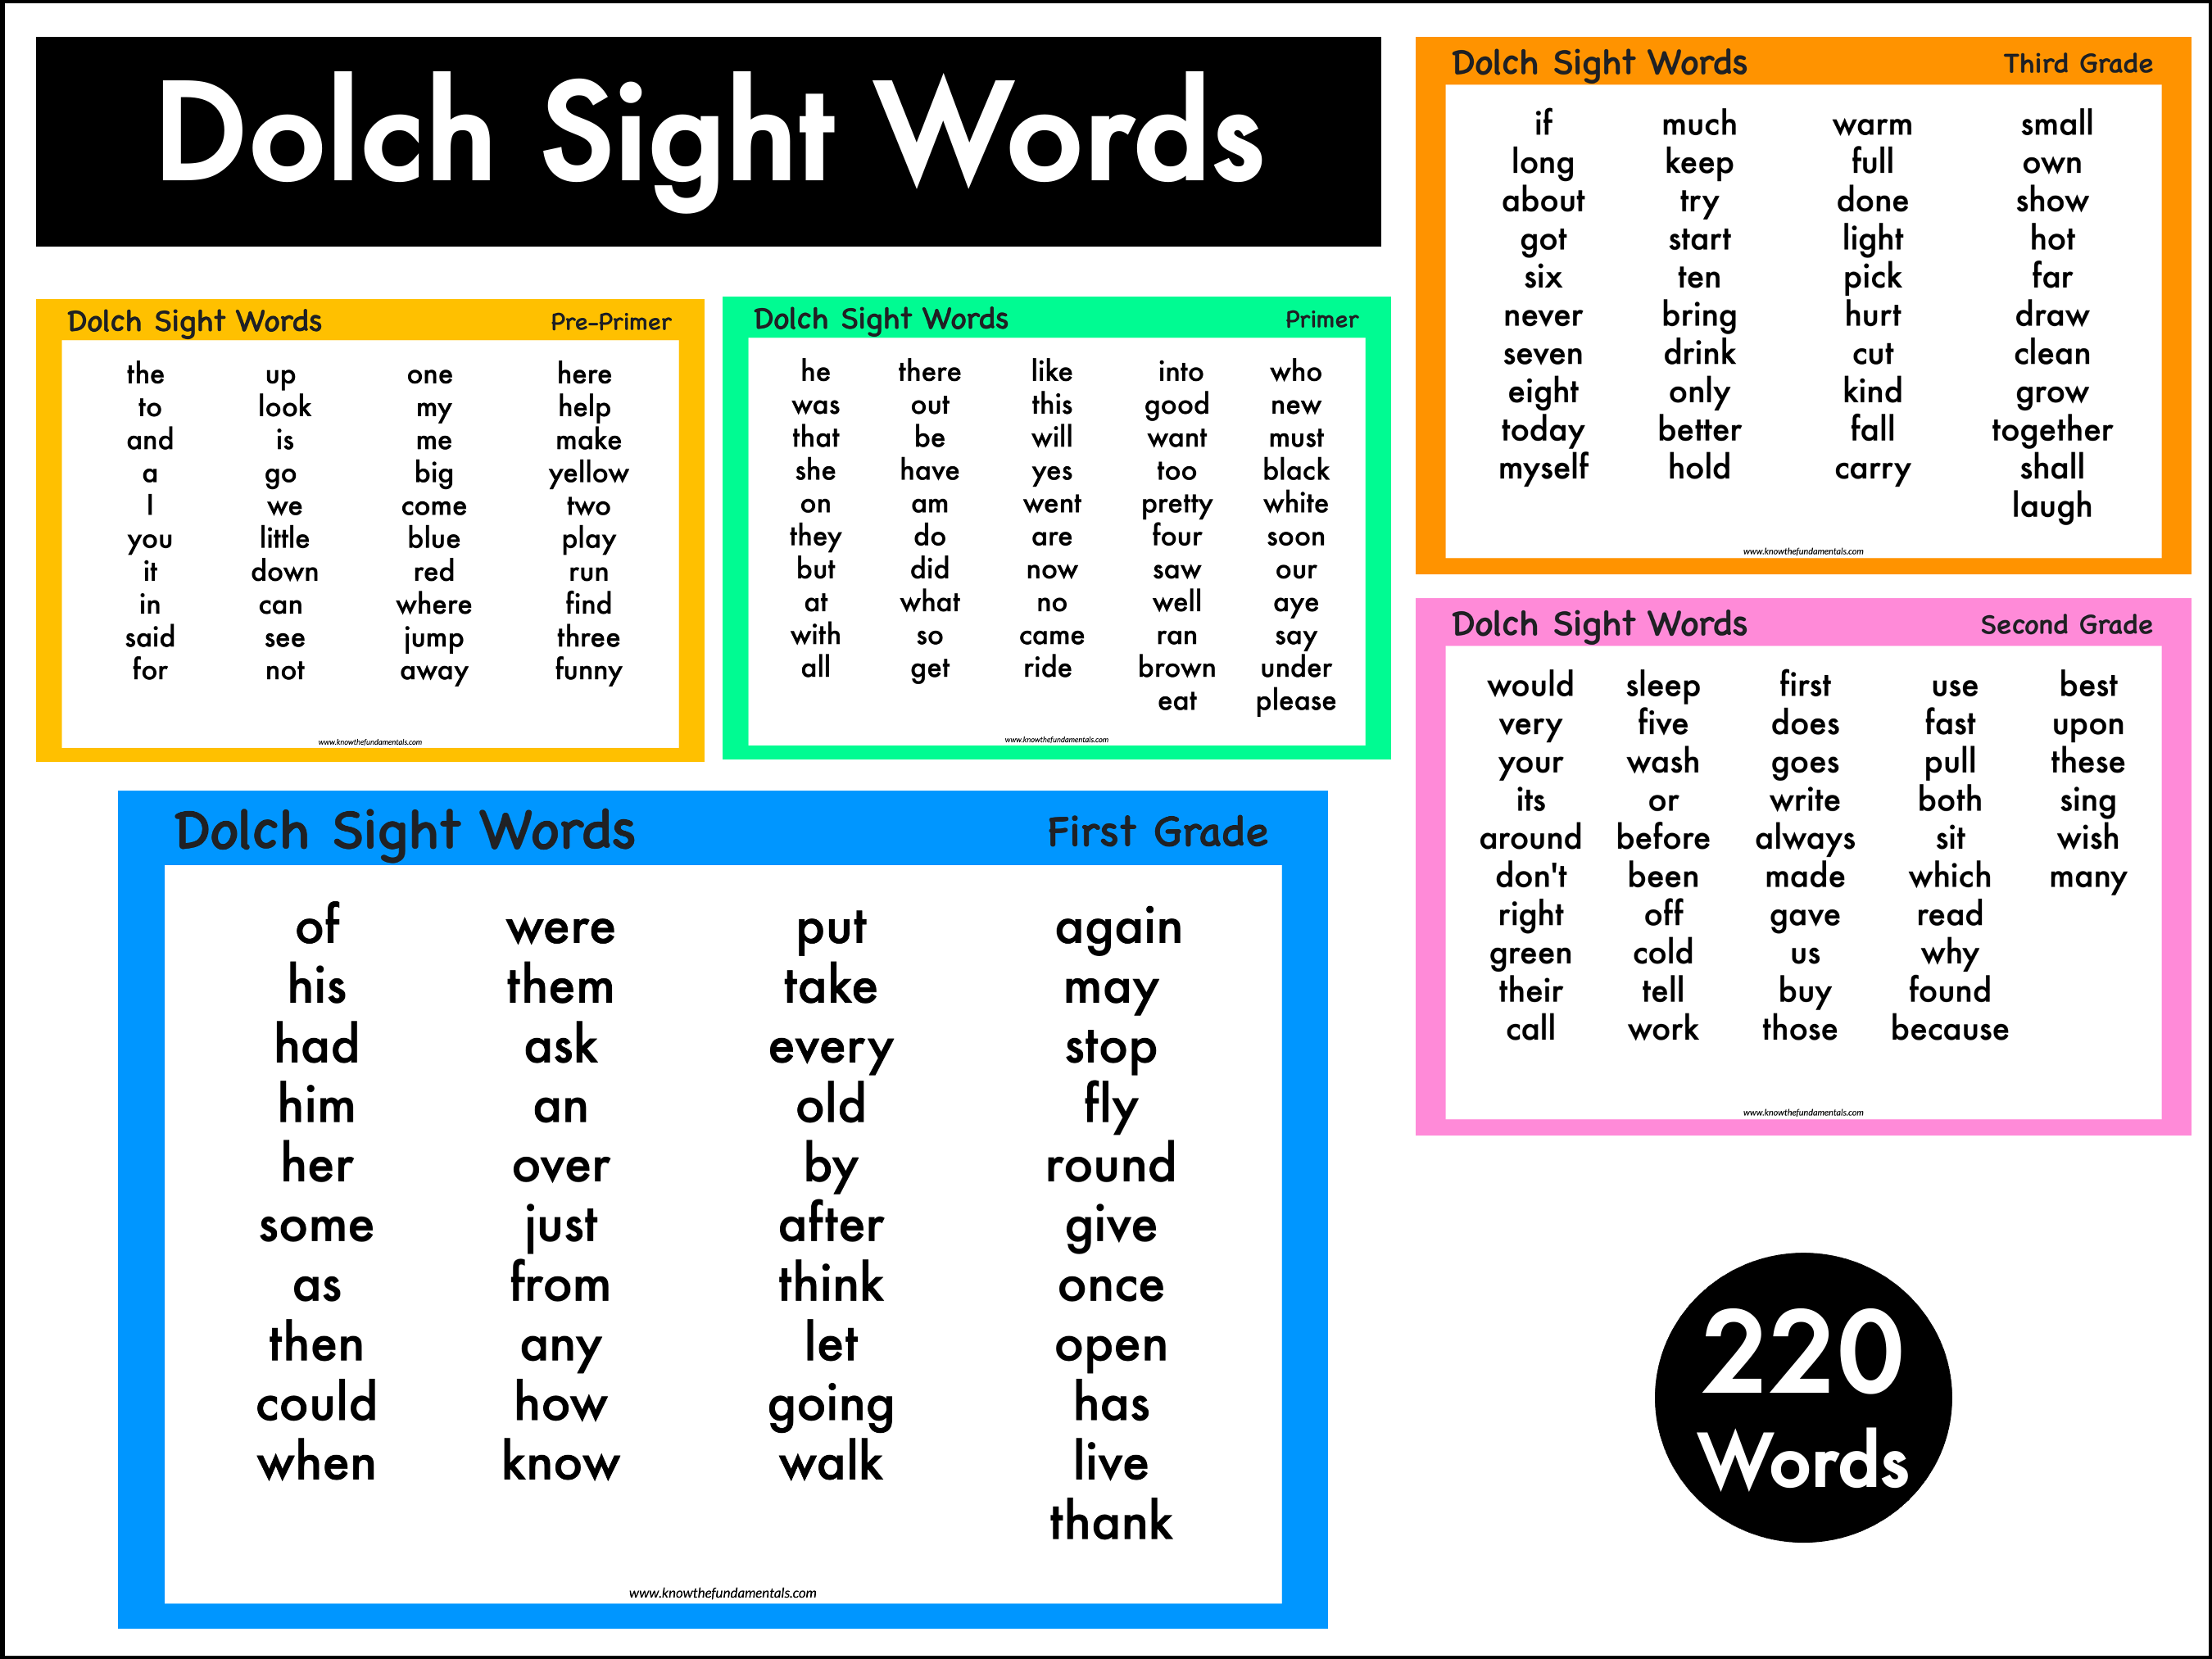 dolch-sight-words-220-words-list-digital-file-knowthefundamentals